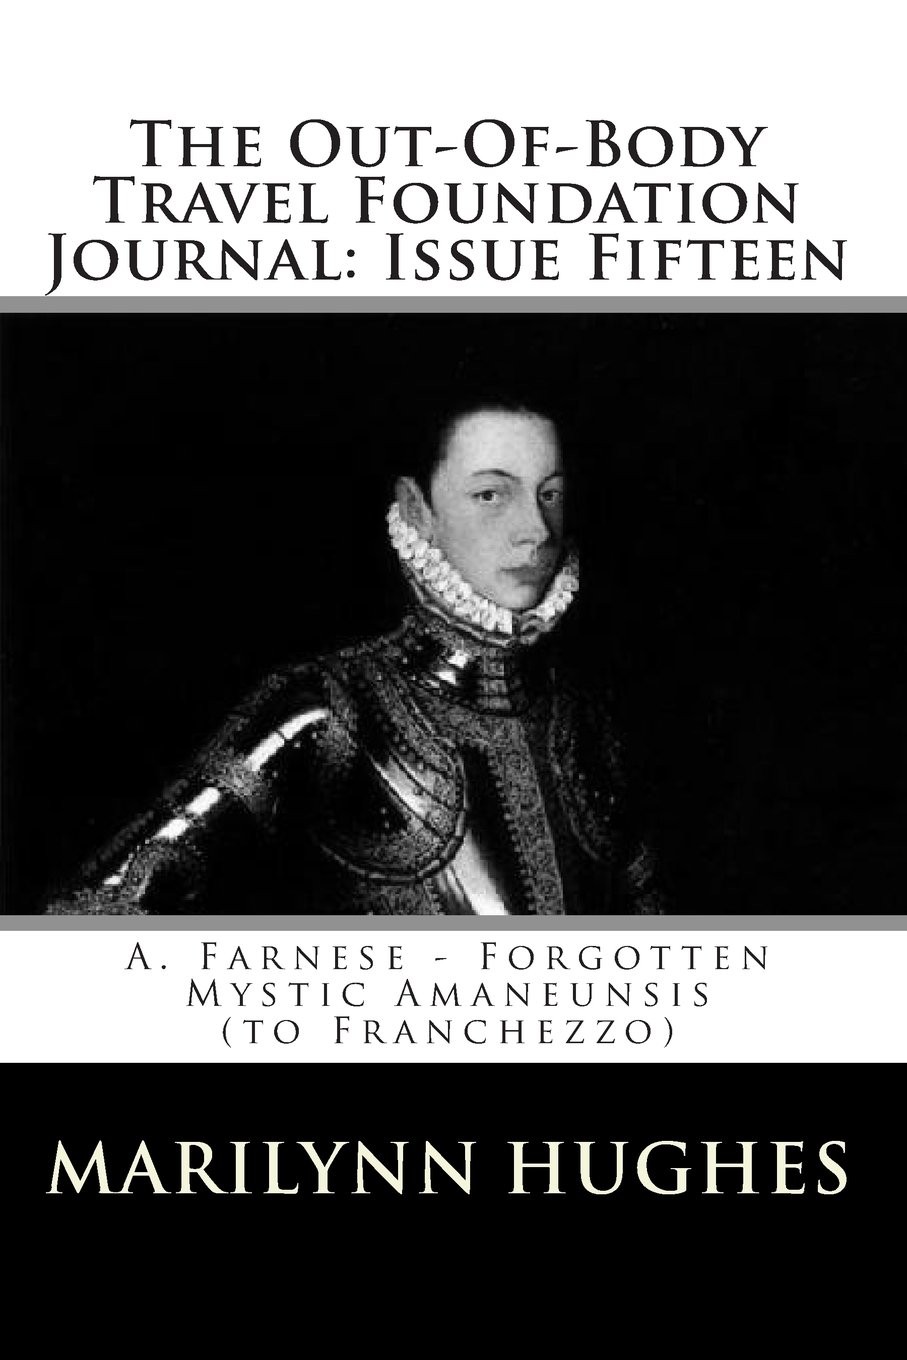 A. Farnese – Forgotten Mystic Amaneunsis (to Franchezzo), Compiled and Edited by Marilynn Hughes